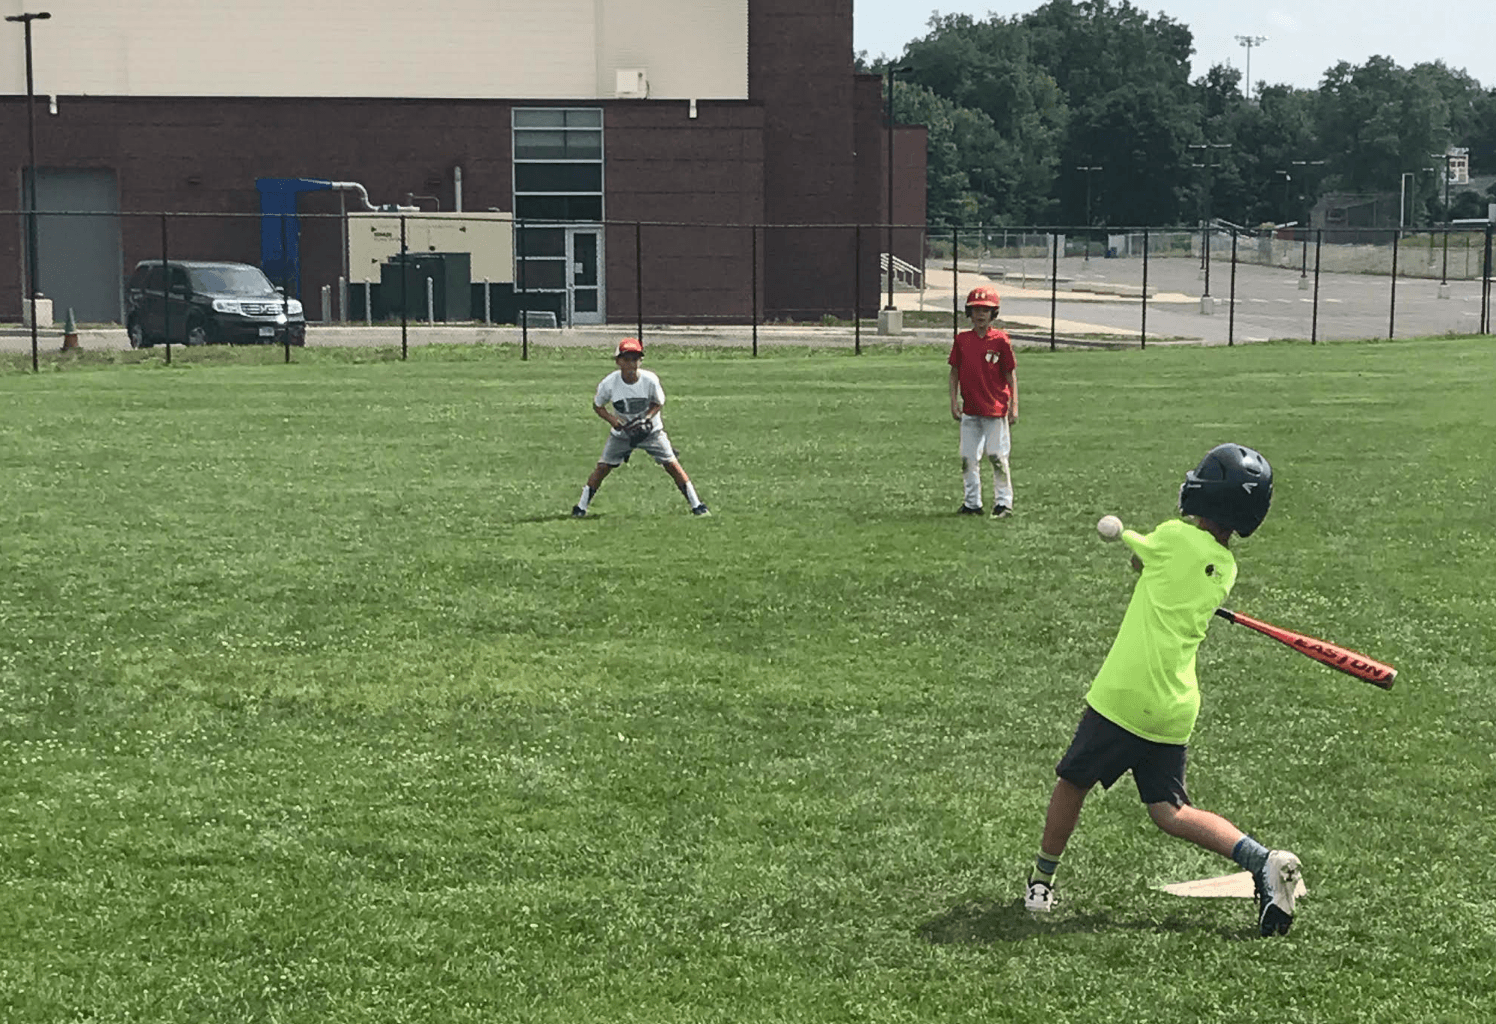 Game action at Cardinal Baseball Camp in Greenwich, CT.